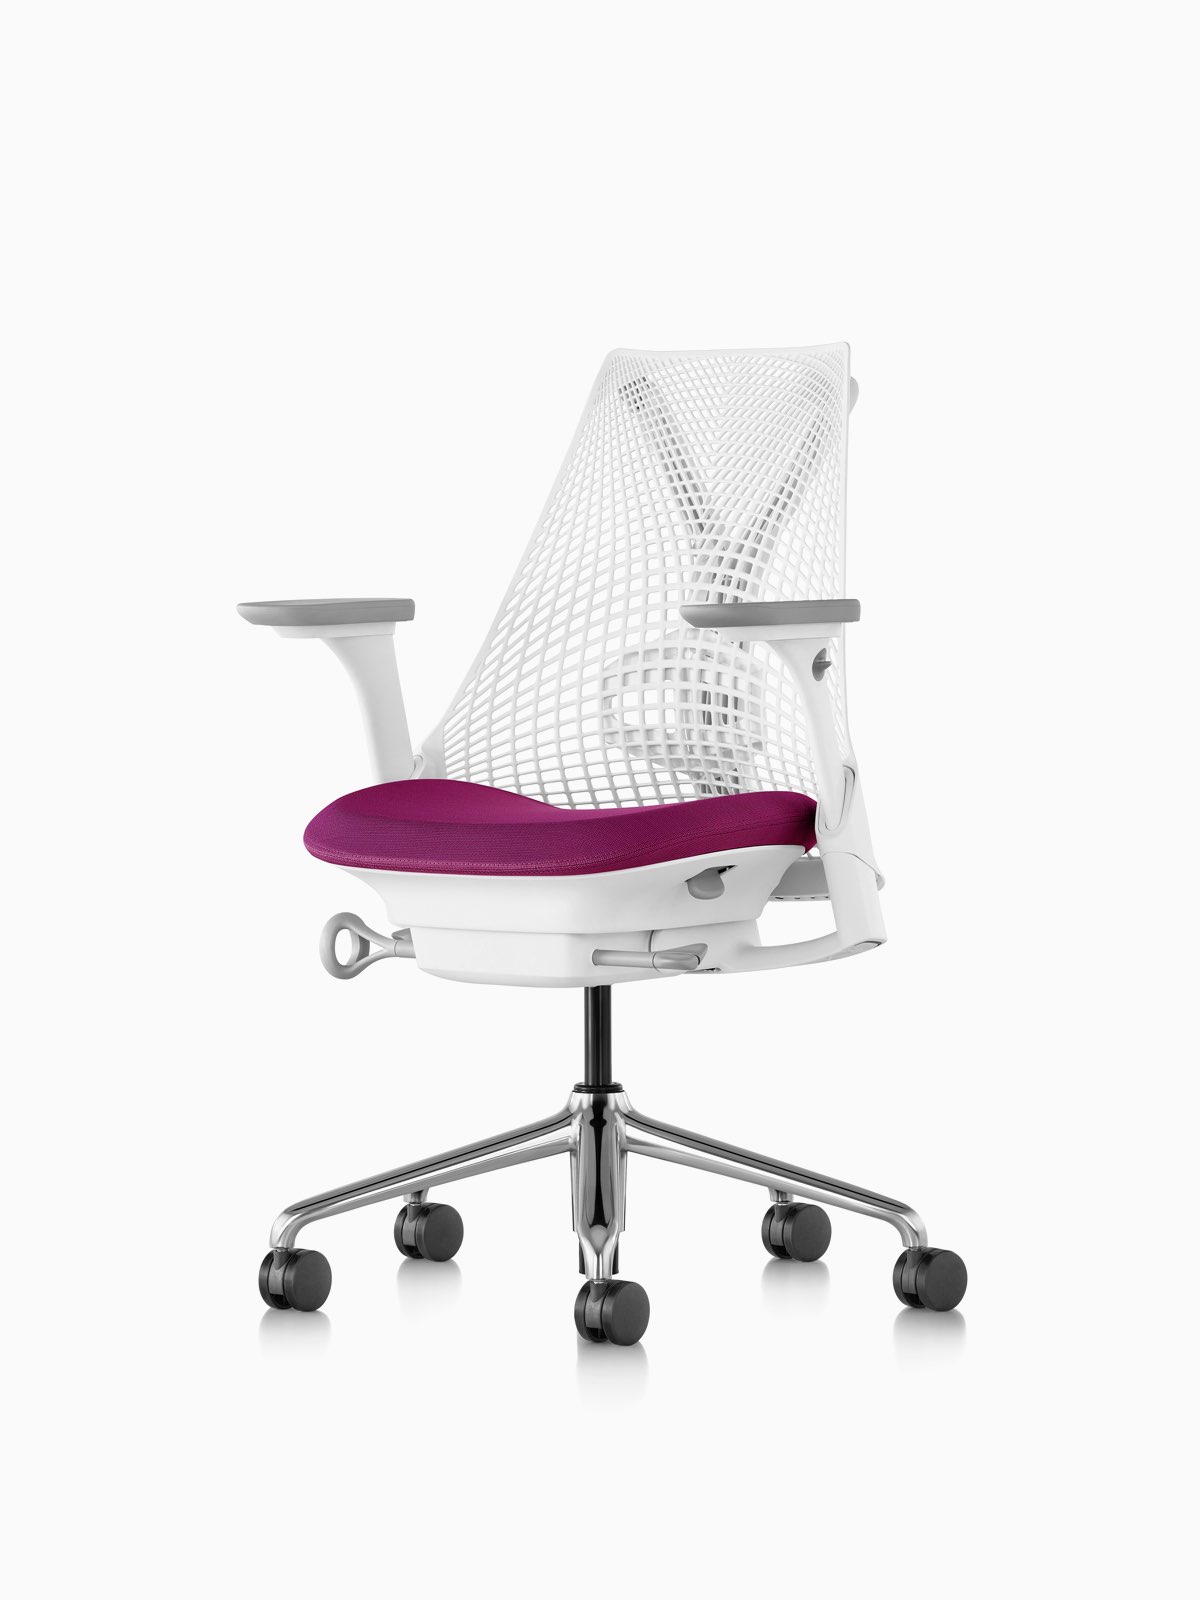 https://www.hermanmiller.com/content/dam/hmicom/page_assets/products/sayl_chairs/th_prd_sayl_chairs_office_chairs_hv.jpg